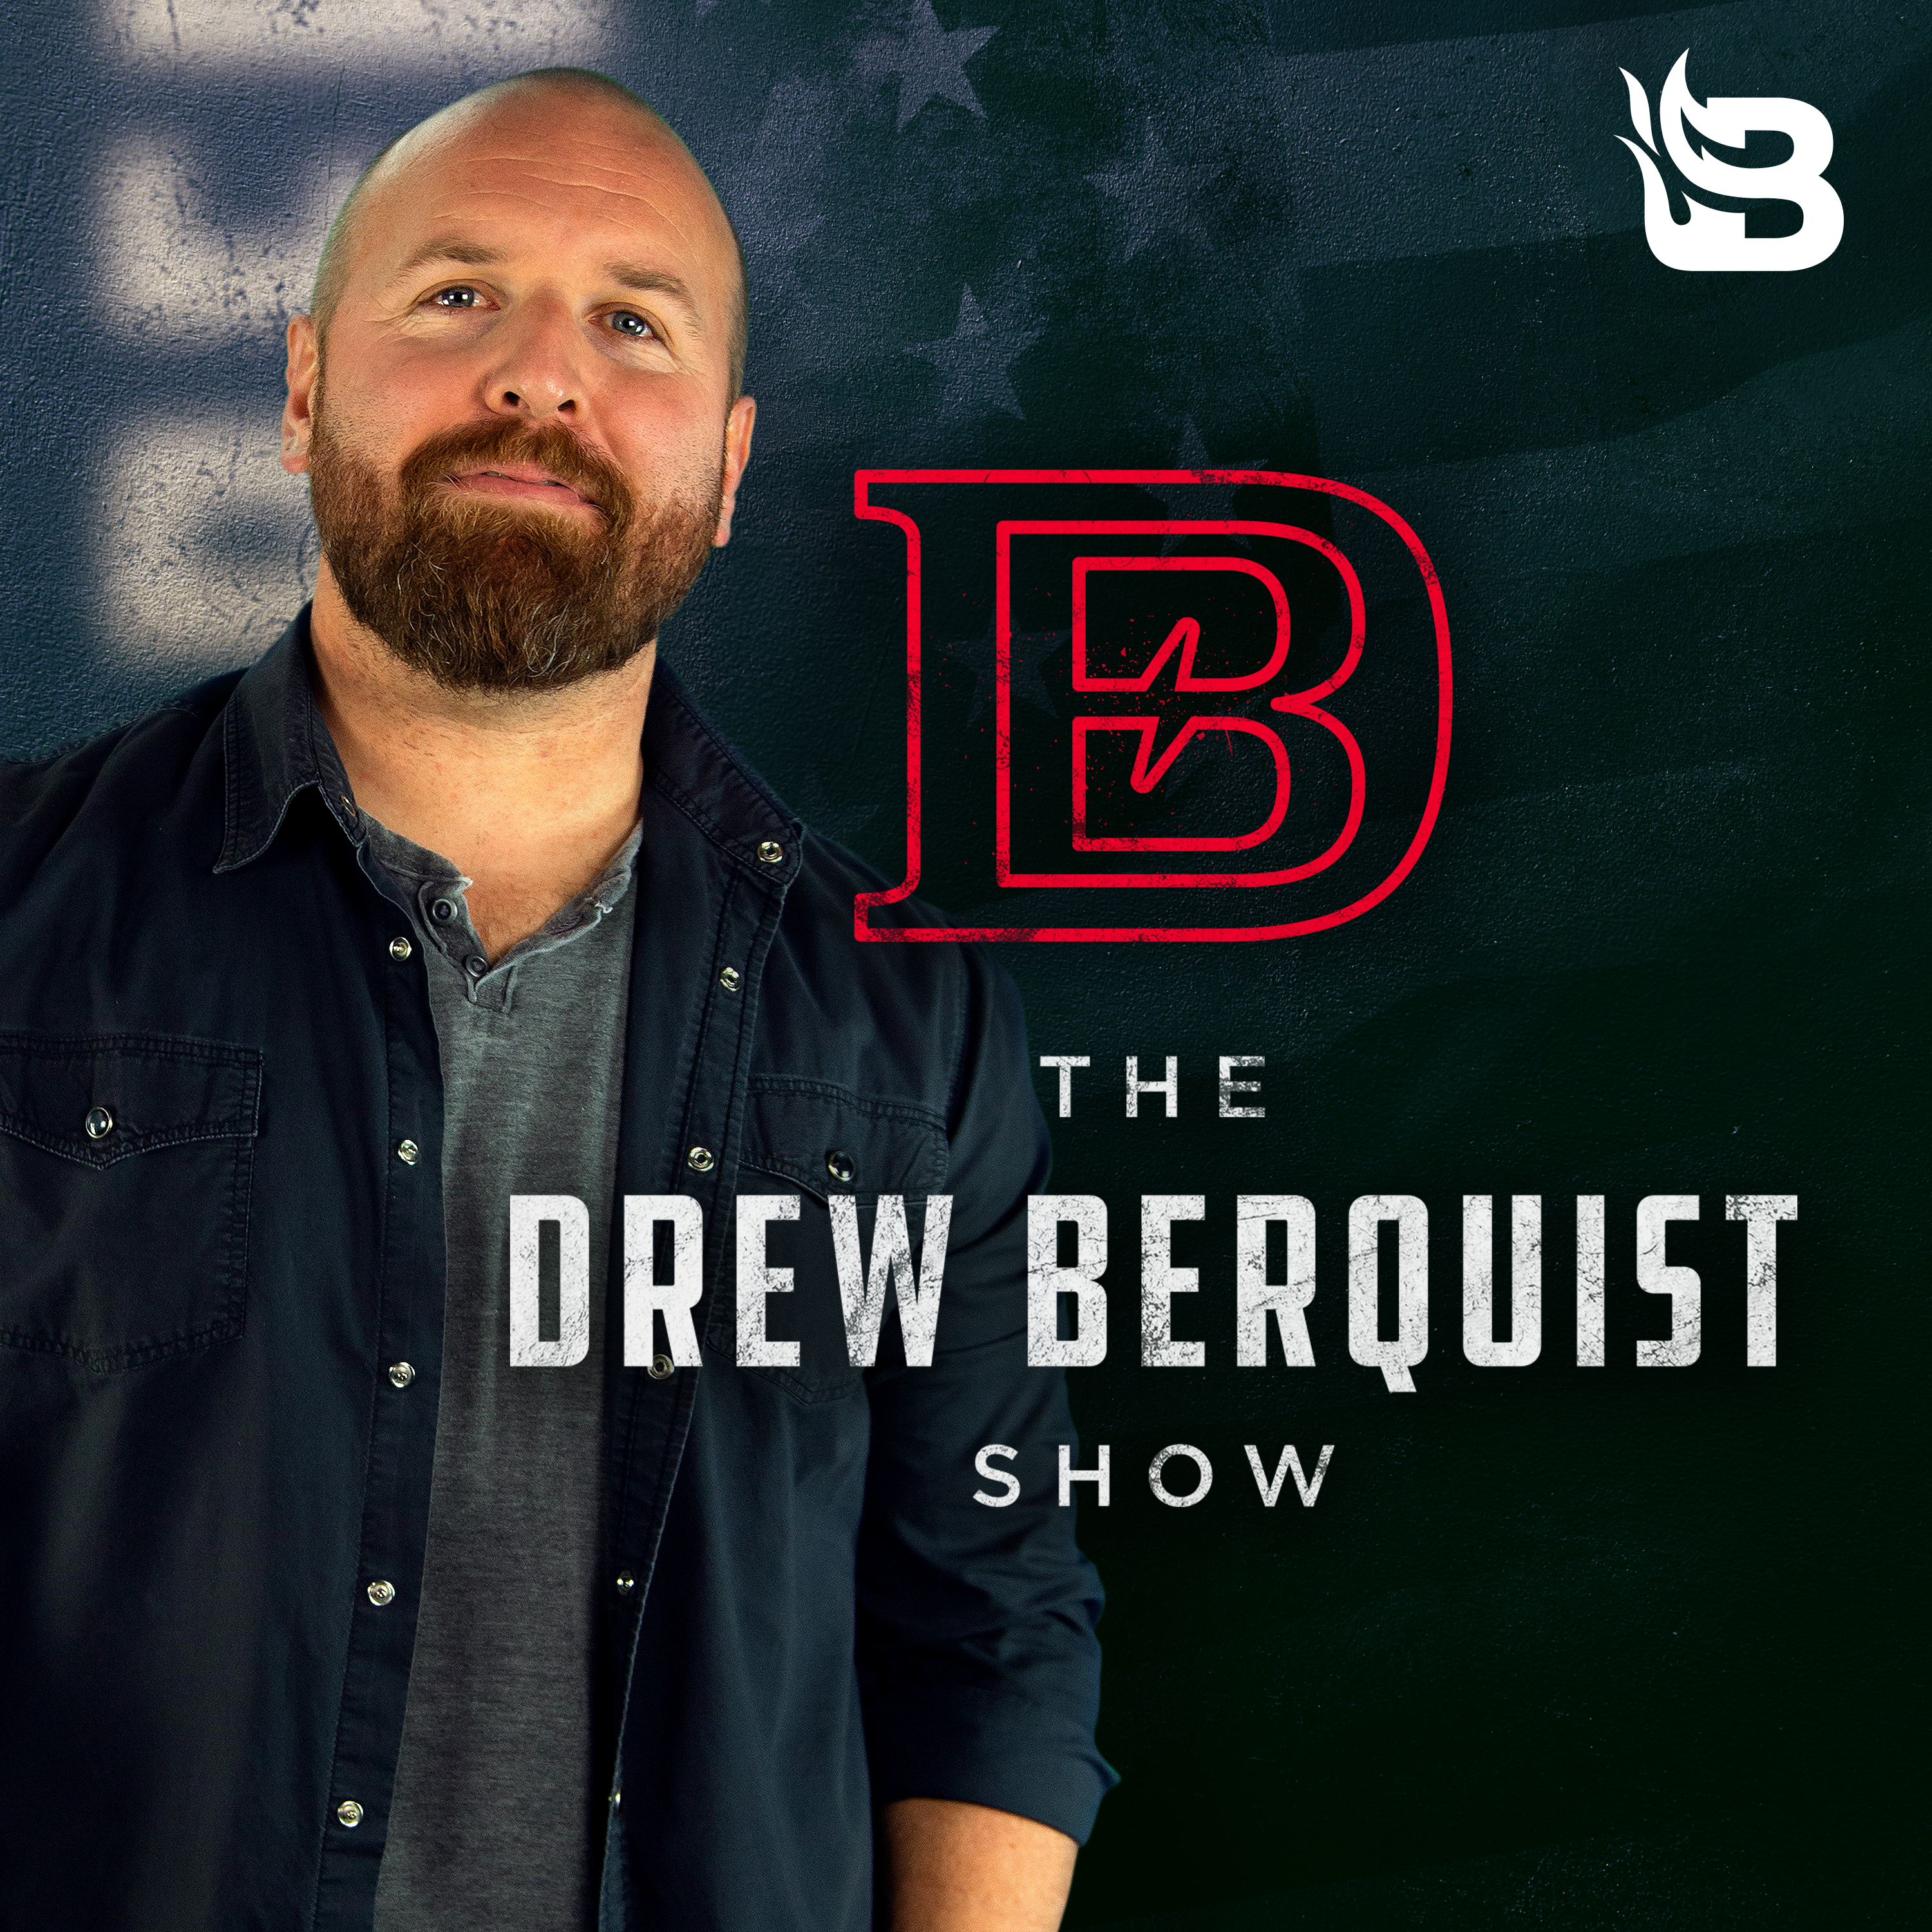 Ep 133 | Jesse Kelly and Tom Cunningham Co-Host | Laura Loomer Guests | The Drew Berquist Show